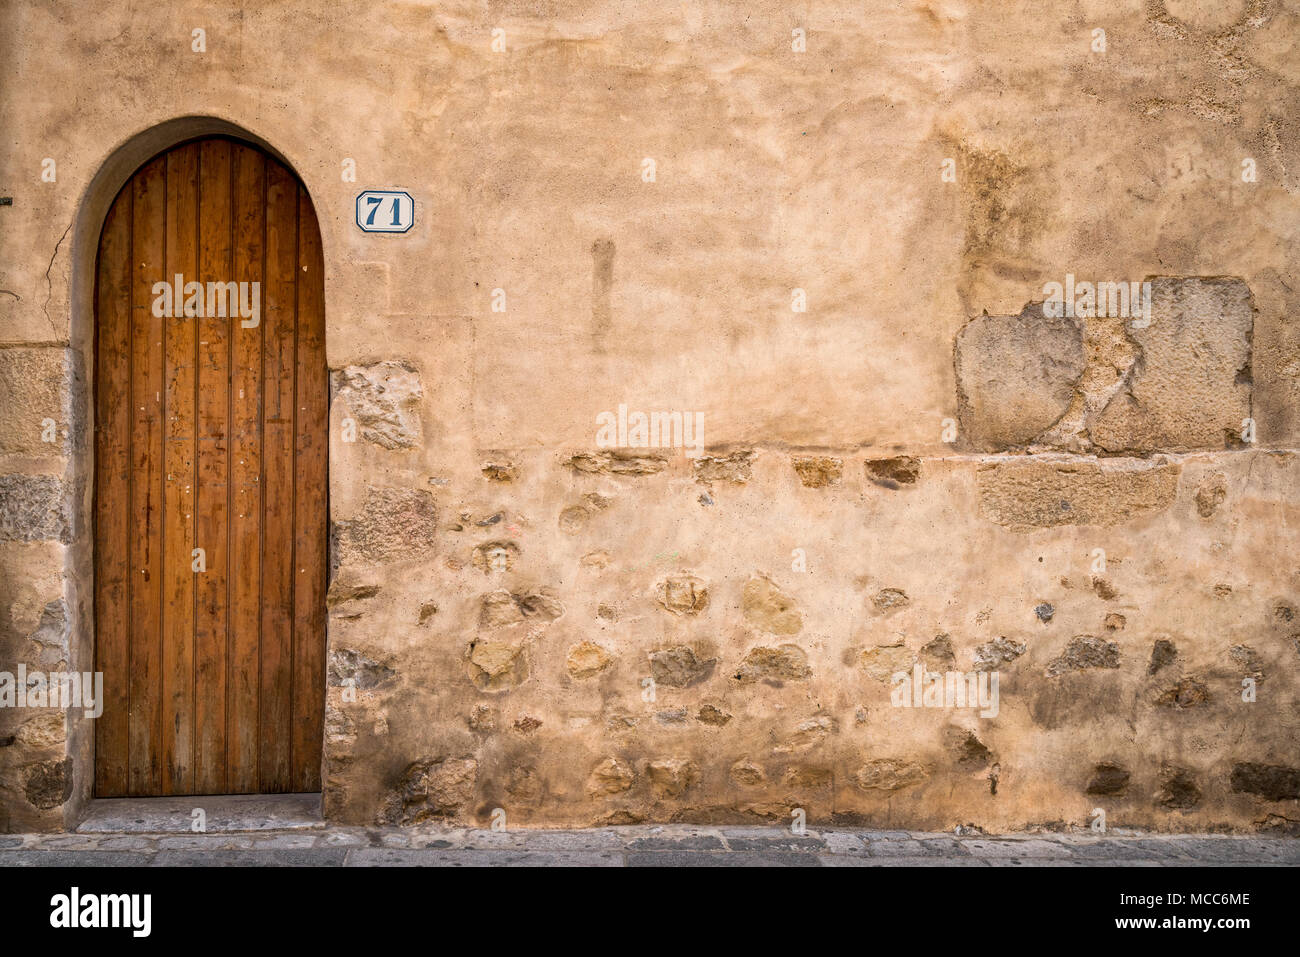 An old door with rustic charm on the streets of Cefalu, Sicily, Italy. Stock Photo